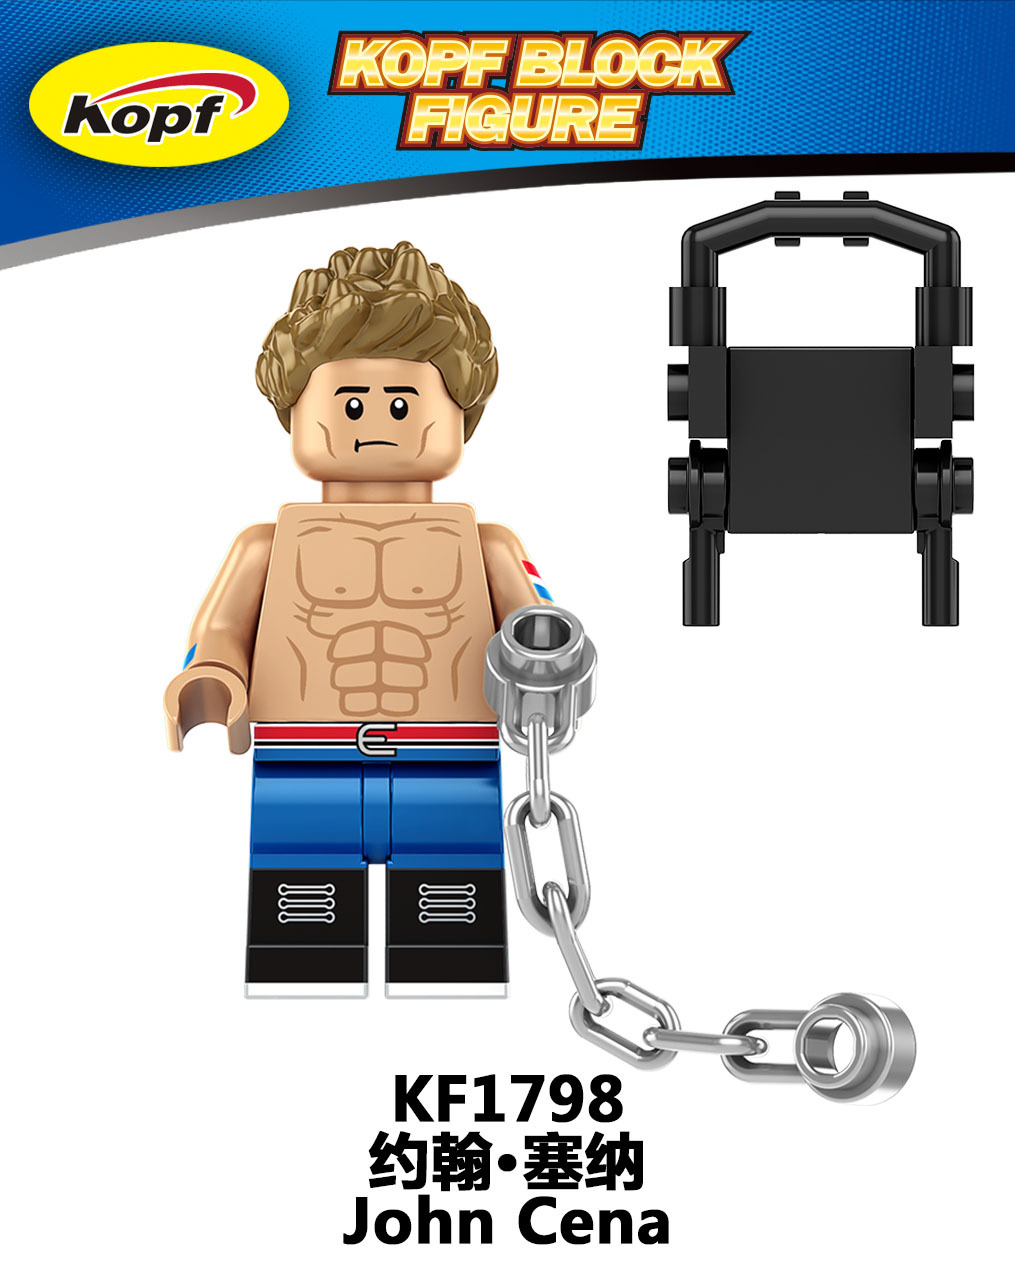 KF6171 KF1796 KF1797 KF1798 KF1799 KF1800 KF1801 KF1802 KF1803 Wrestling Superstar Rnady Savage Ted DiBiase John Cena Ric Flair The Rock StingMini Stone Cold Building Blocks Action Figures Educational Toys For Kids Gifts